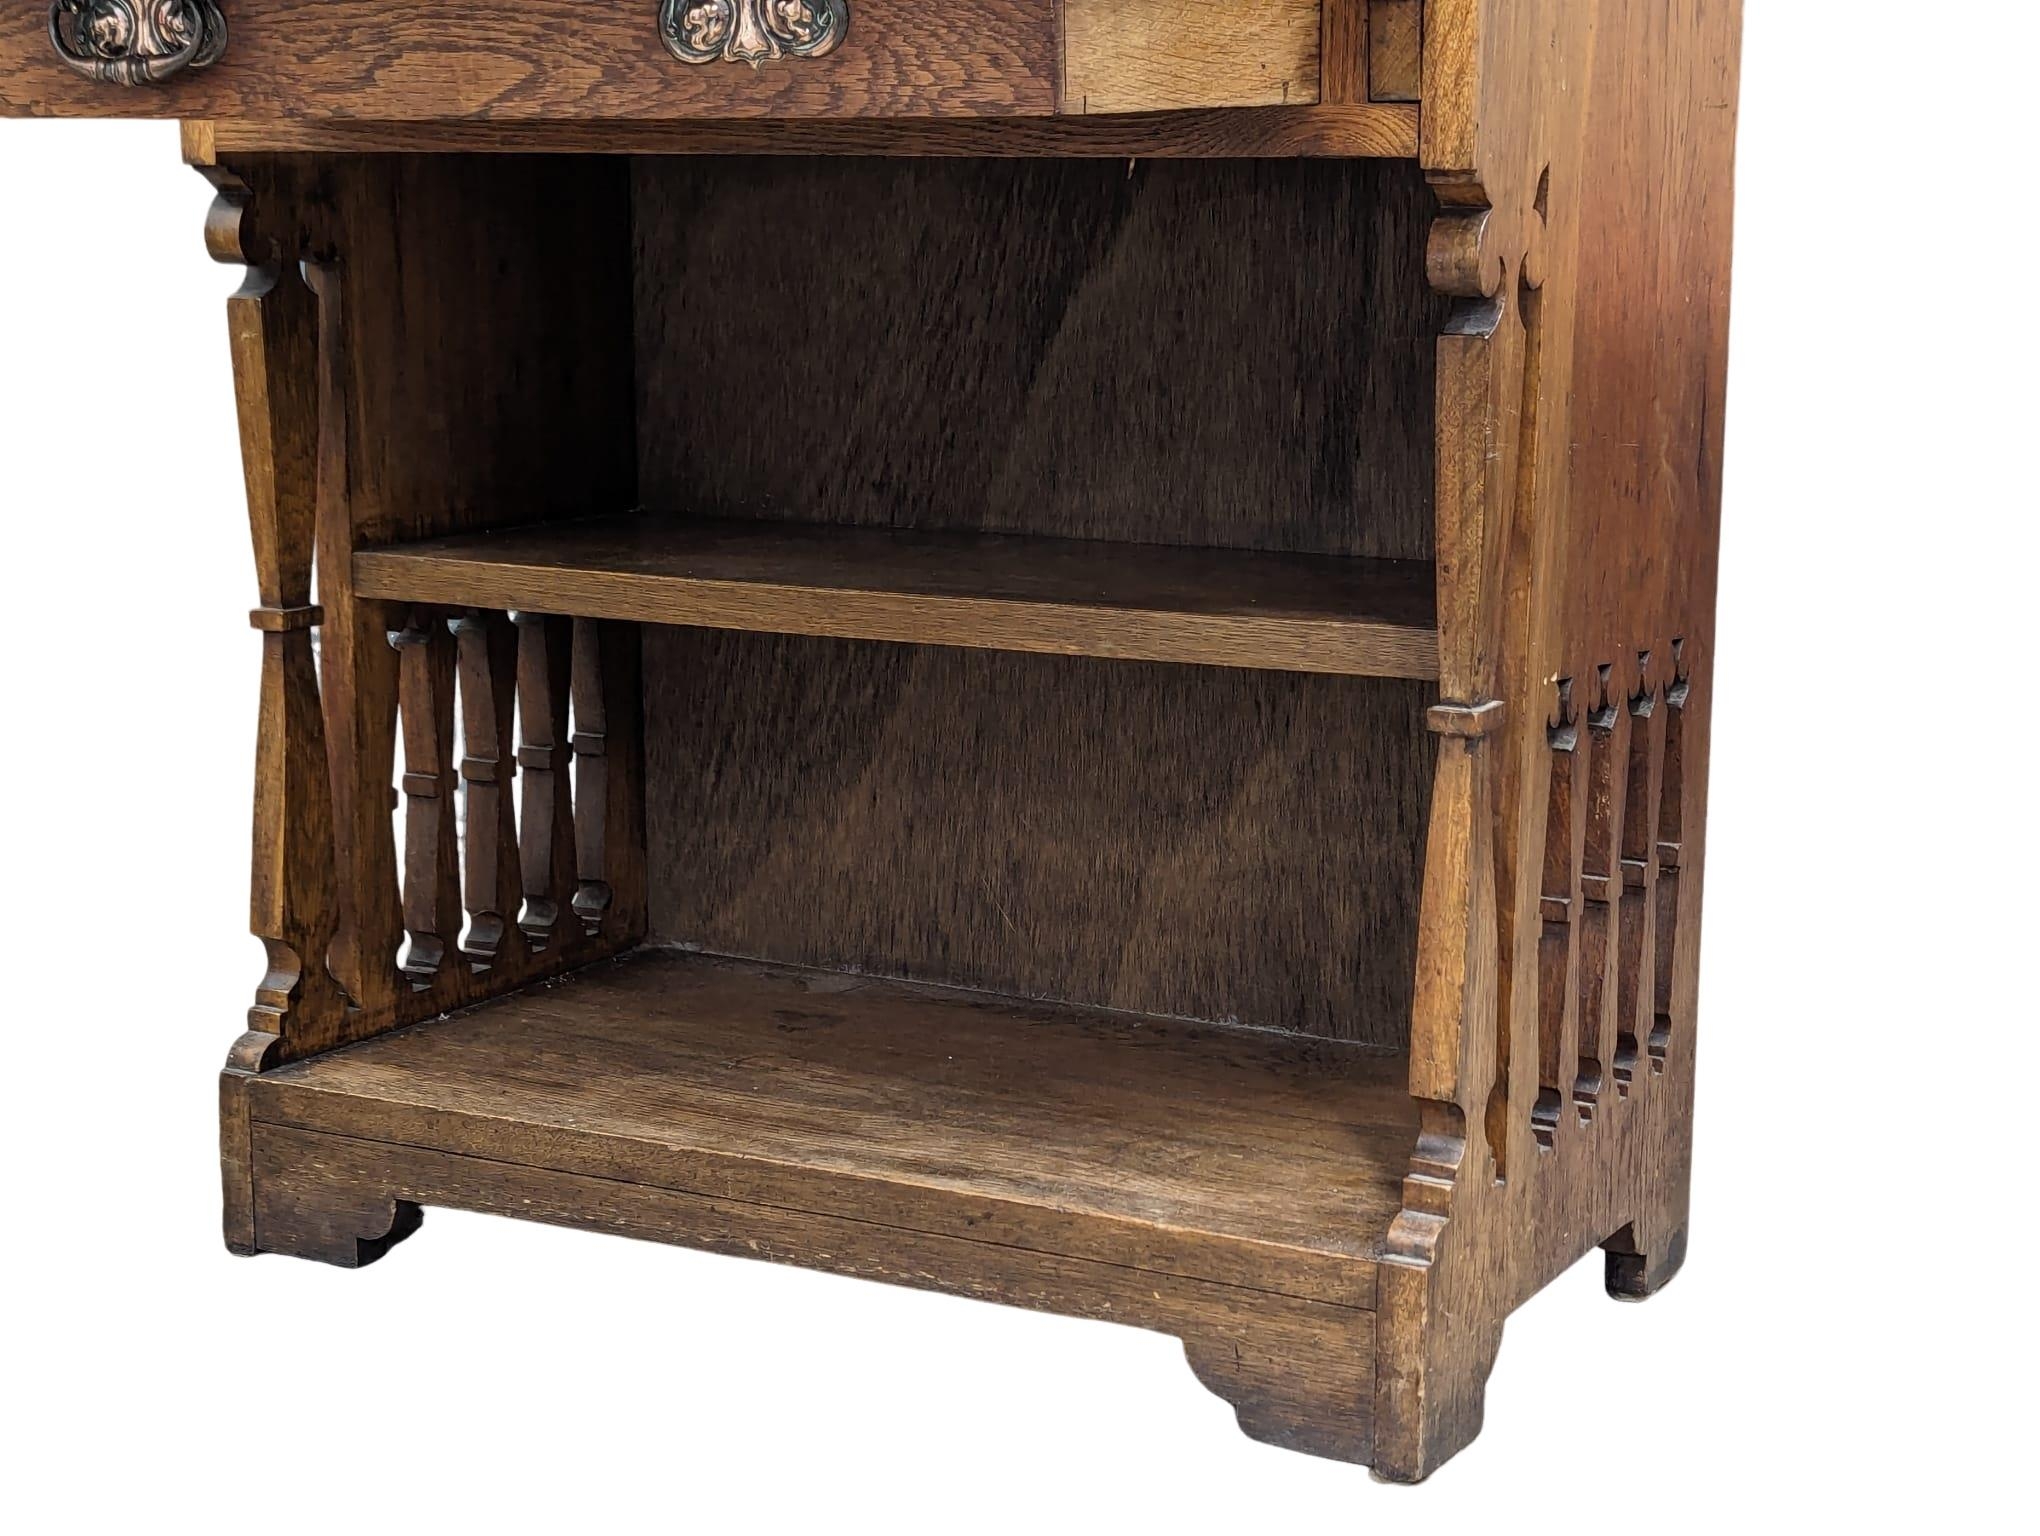 A late 19th Century oak Arts & Crafts bureau bookcase, in the manner of Liberty. Circa 1880-1890s. - Image 8 of 10